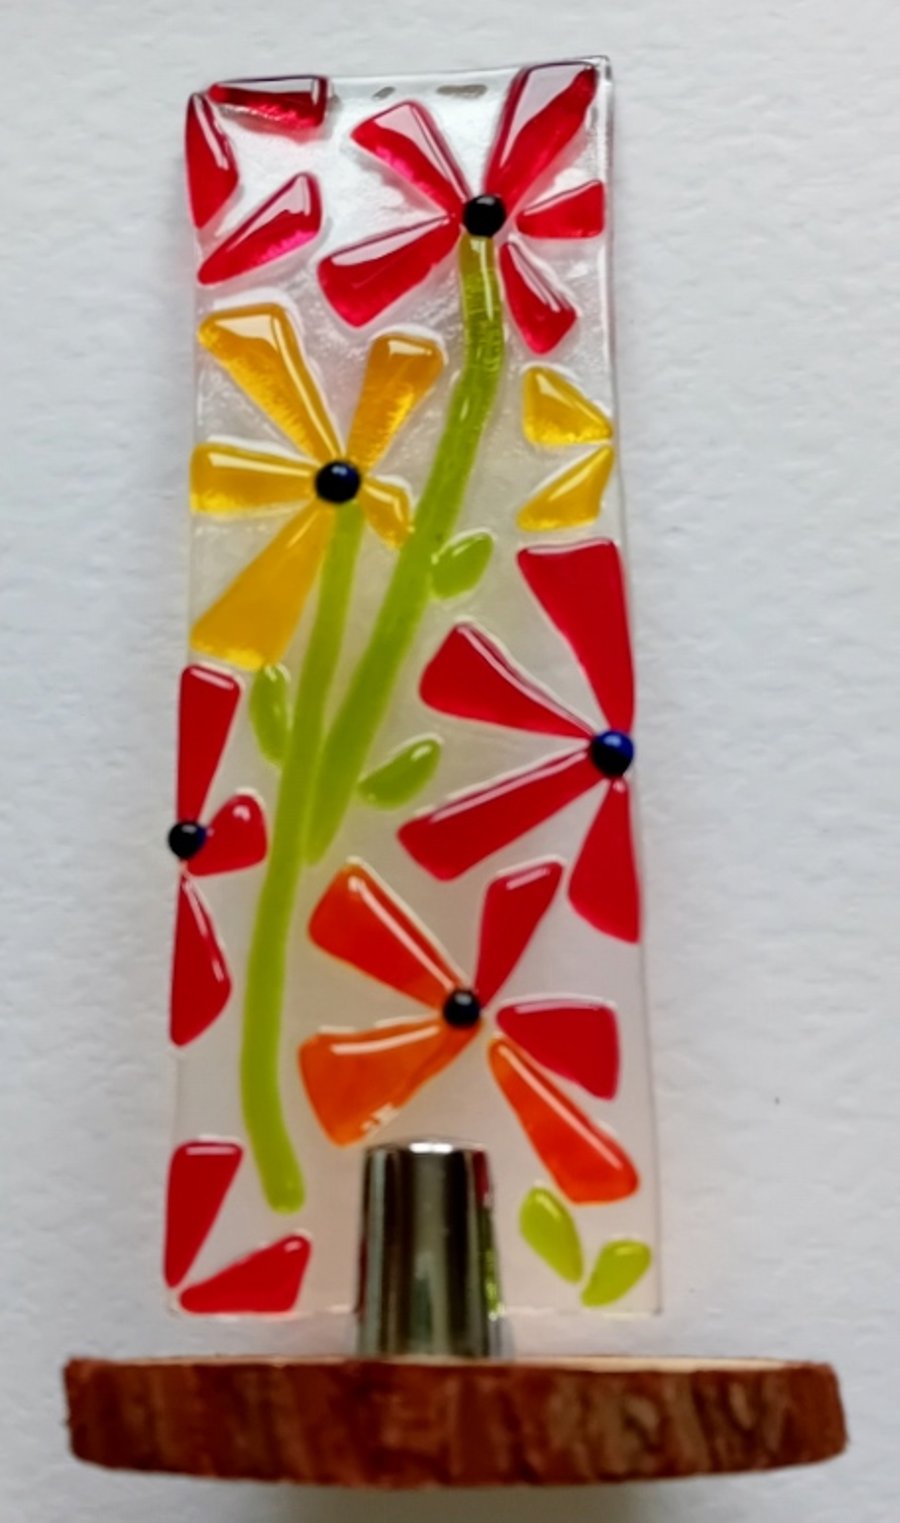 Fused glass Worry Poppet with flower effects